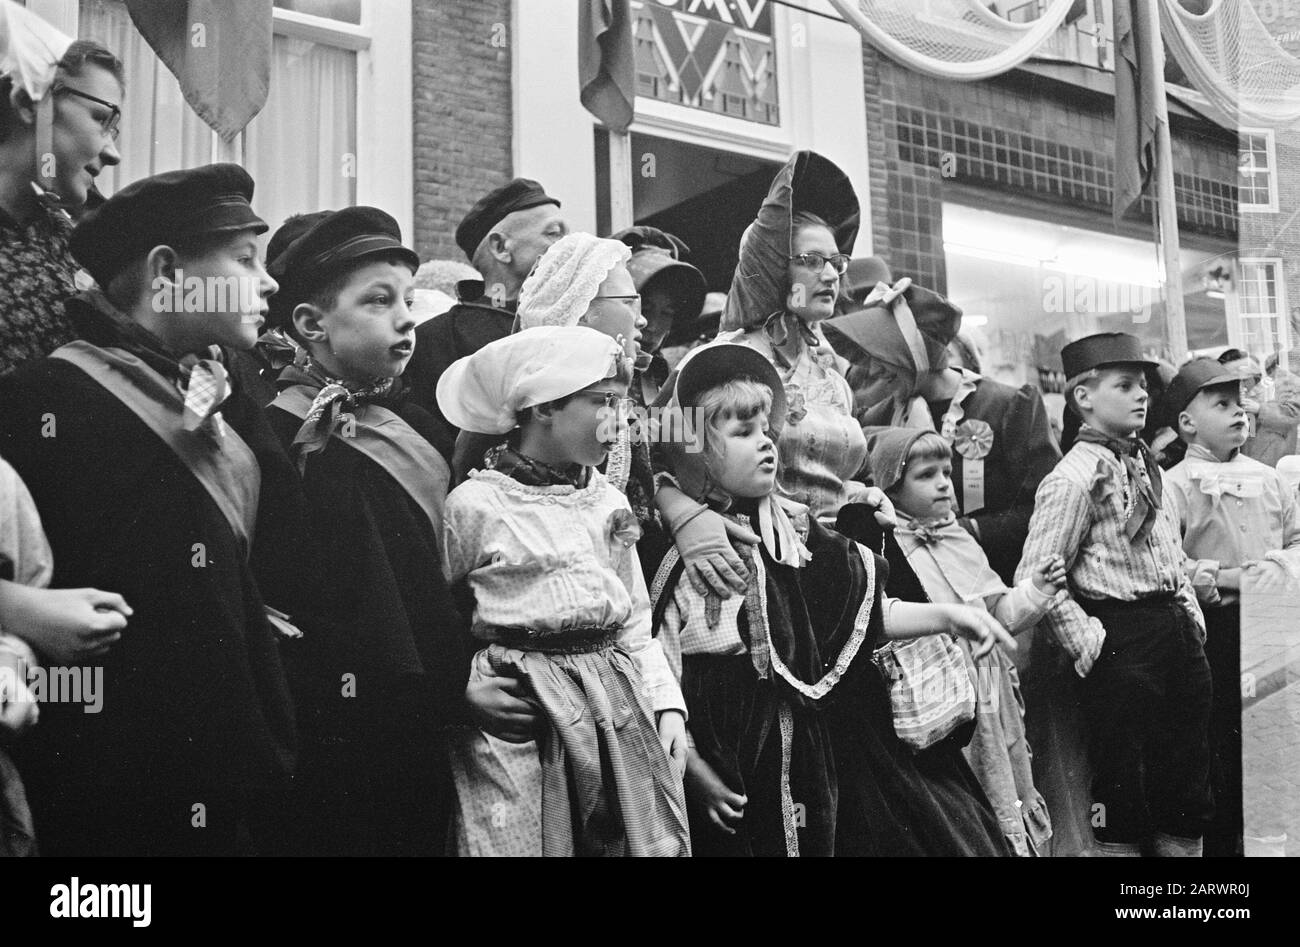 Te Scheveningen commemorated the landing and entry of Prince Willem Frederik. Spectators in 18th century clothing 1813-1863 Date: 30 November 1963 Location: Scheveningen, Zuid-Holland Keywords: Spectators, commemorations, entries, landings Personal name: FREDERIK, WILLEM PRINS Stock Photo